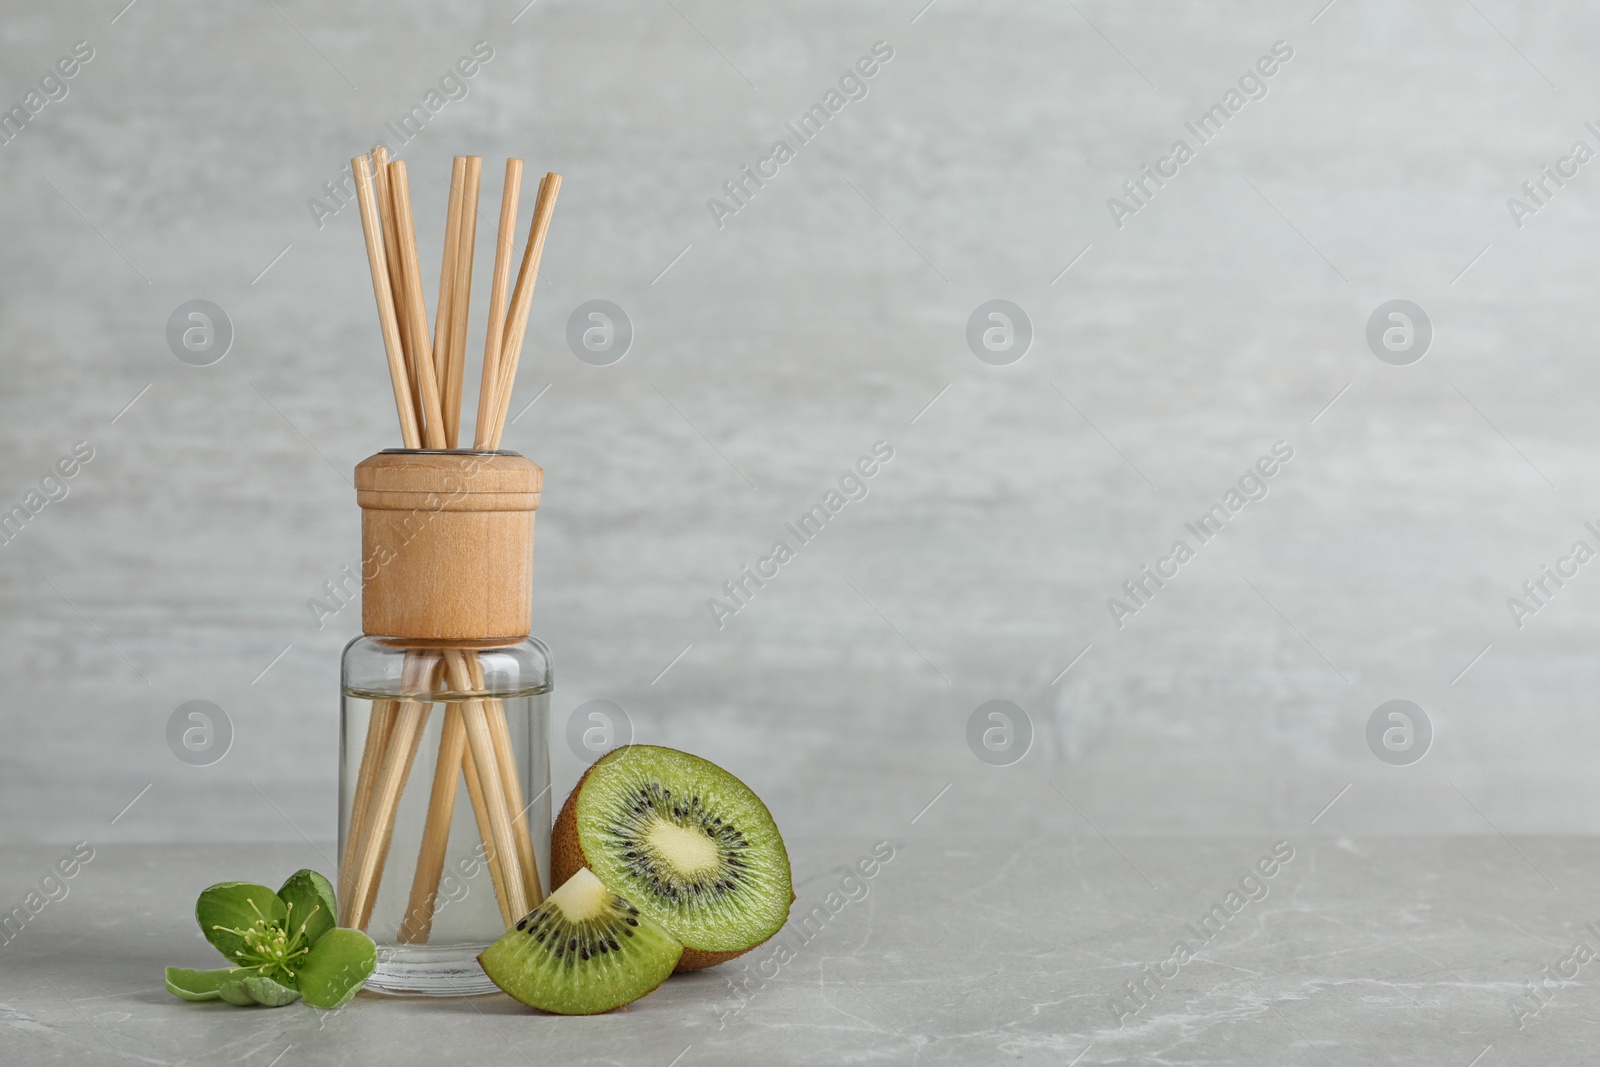 Photo of Aromatic reed freshener and kiwi on table against grey background. Space for text